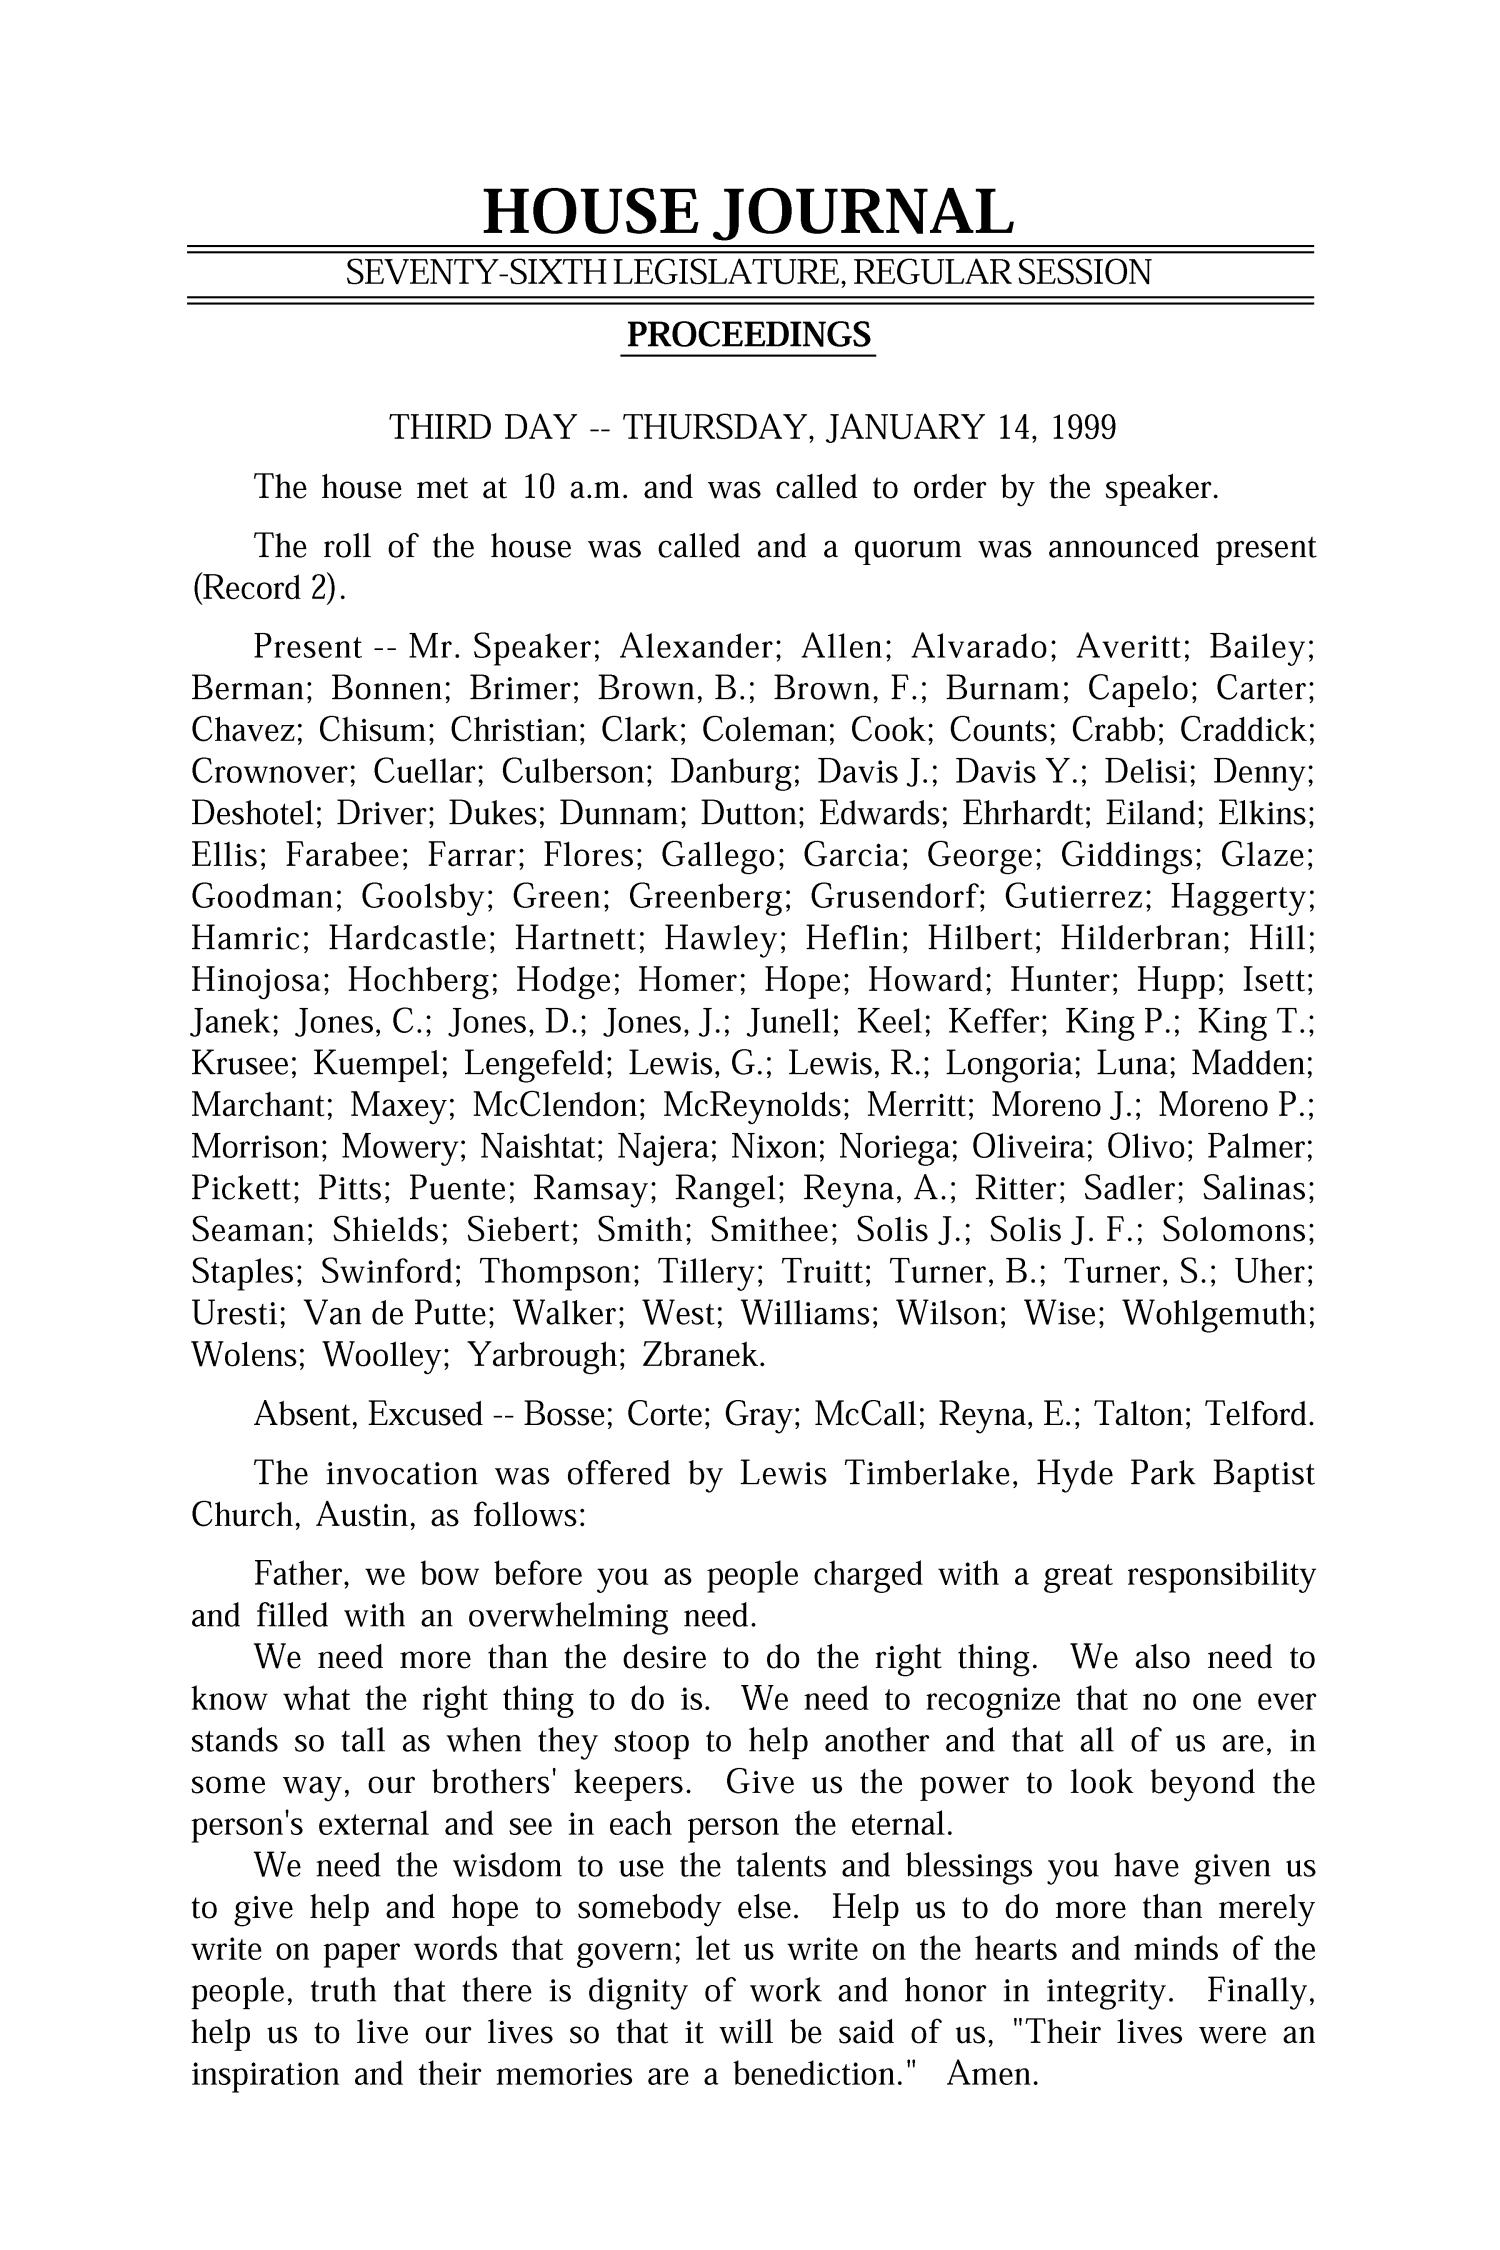 Journal of the House of Representatives of the Regular Session of the Seventy-Sixth Legislature of the State of Texas, Volume 1
                                                
                                                    39
                                                